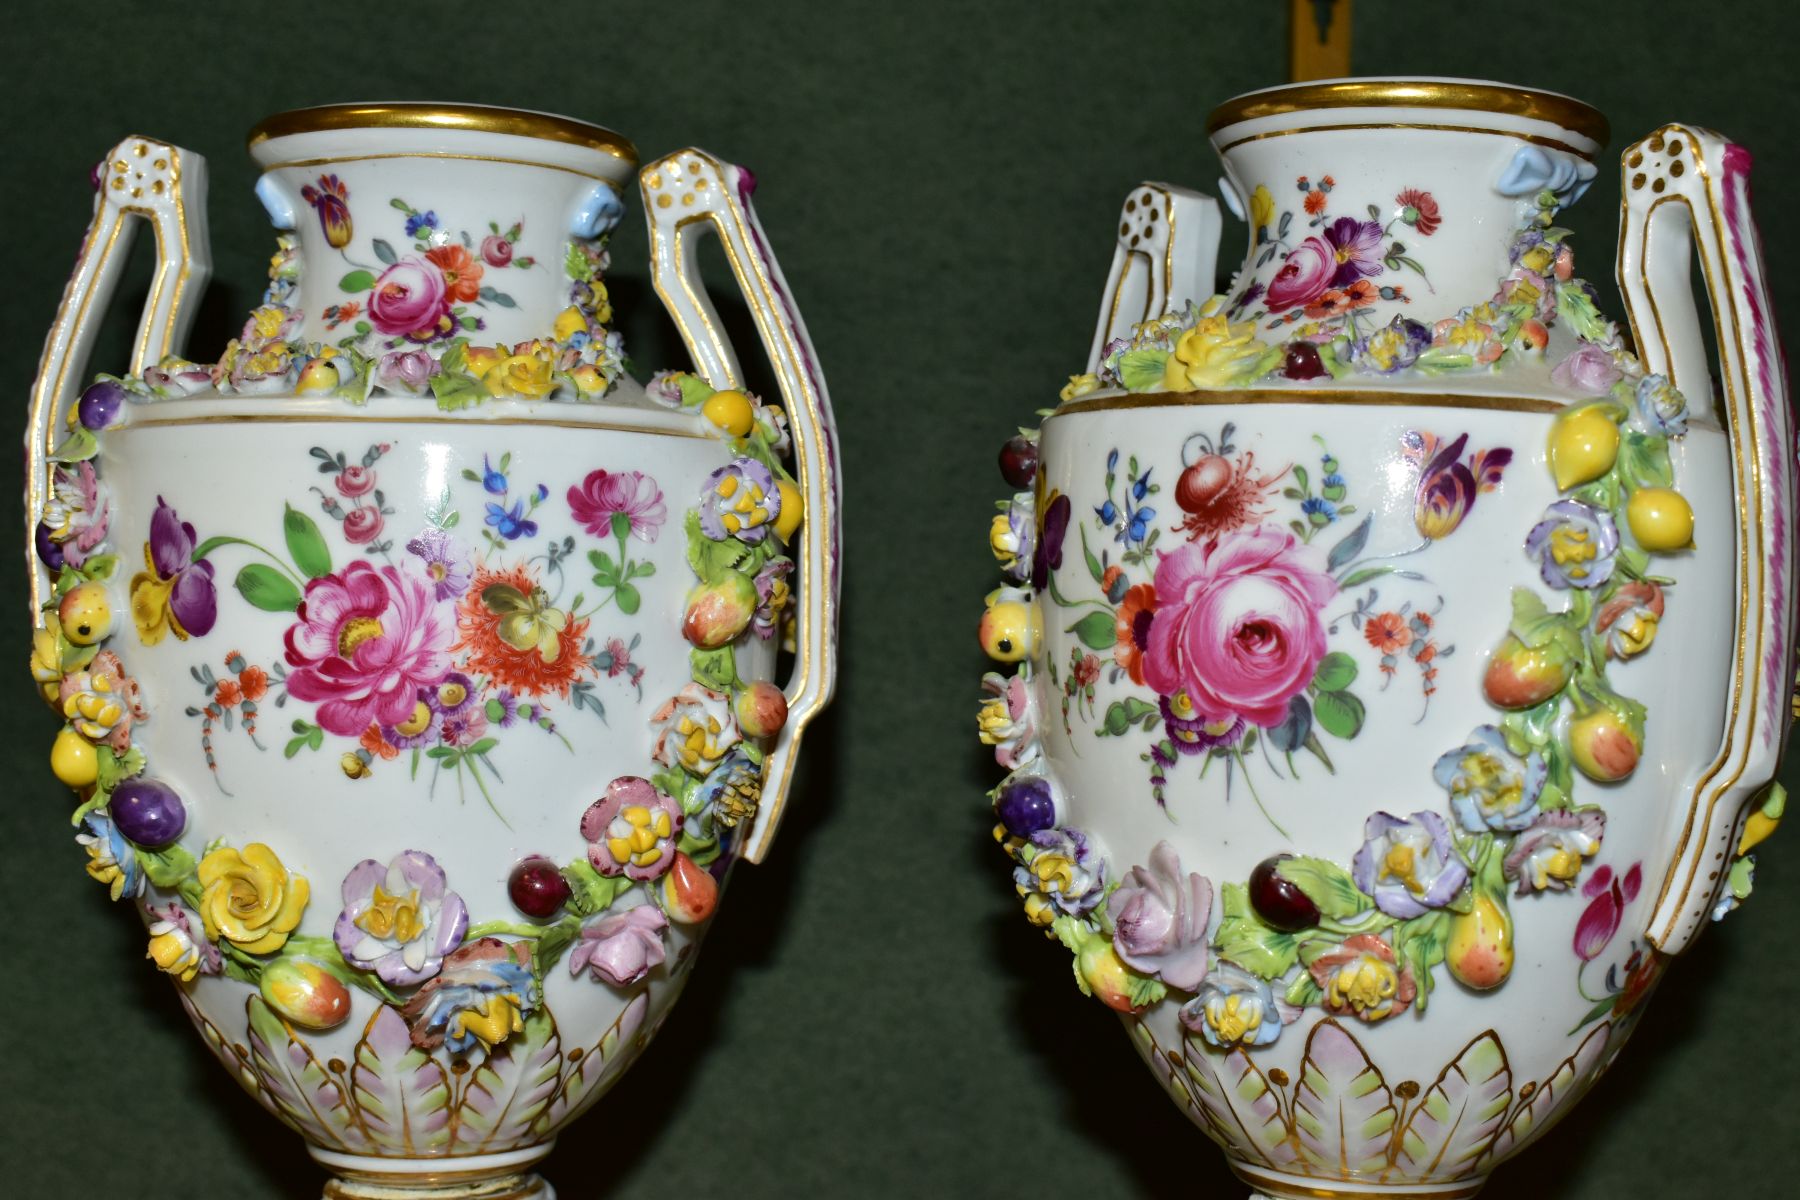 A PAIR OF EARLY 20TH CENTURY POTSCHAPPEL PORCELAIN TWIN HANDLED FLORAL ENCRUSTED VASES ON PLINTHS, - Image 8 of 20